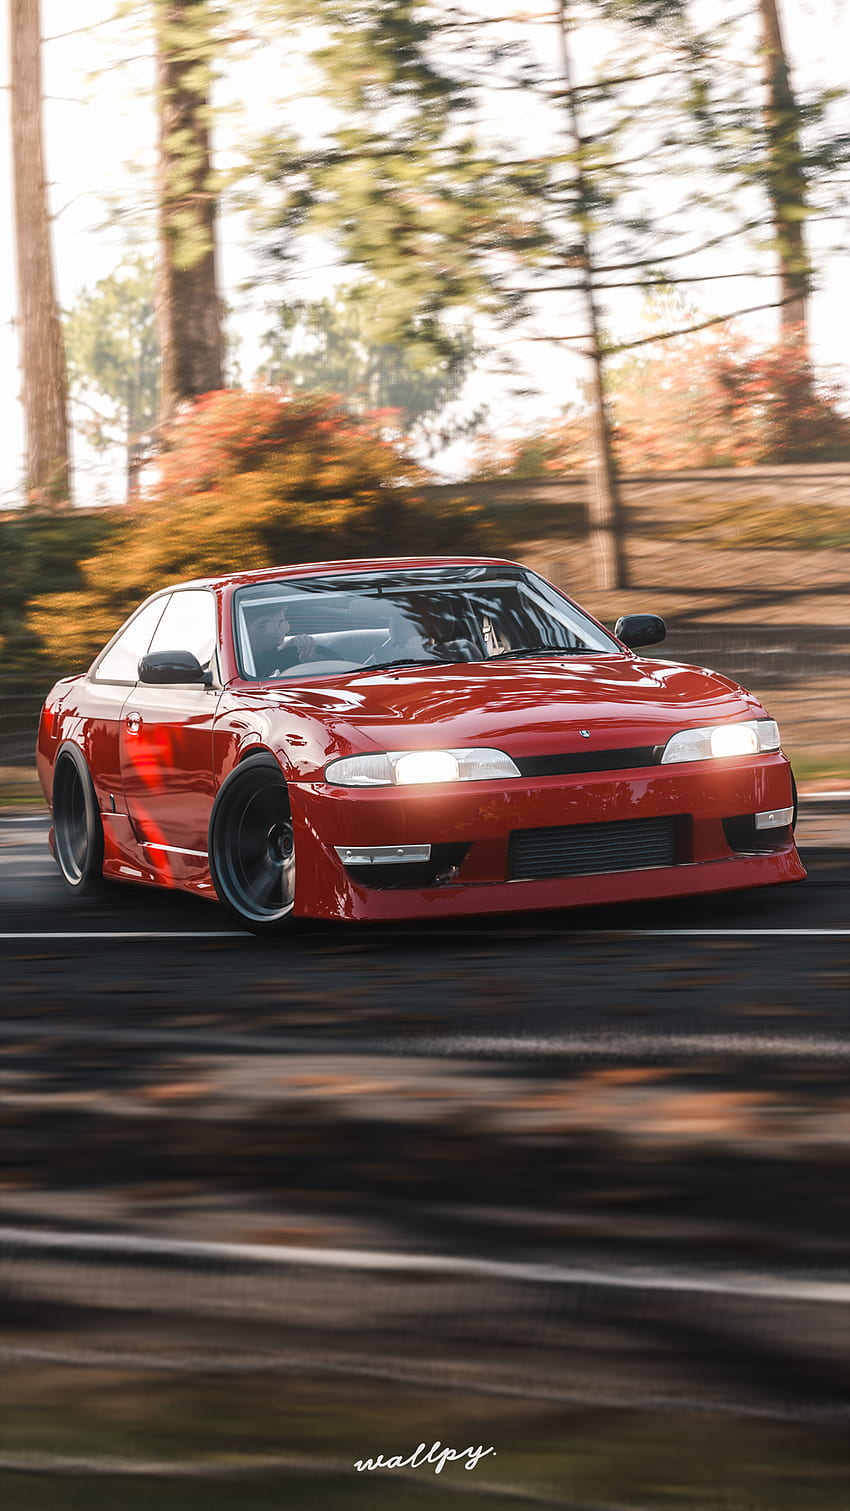 JDM Drift Cars Wallpapers 4k APK for Android Download